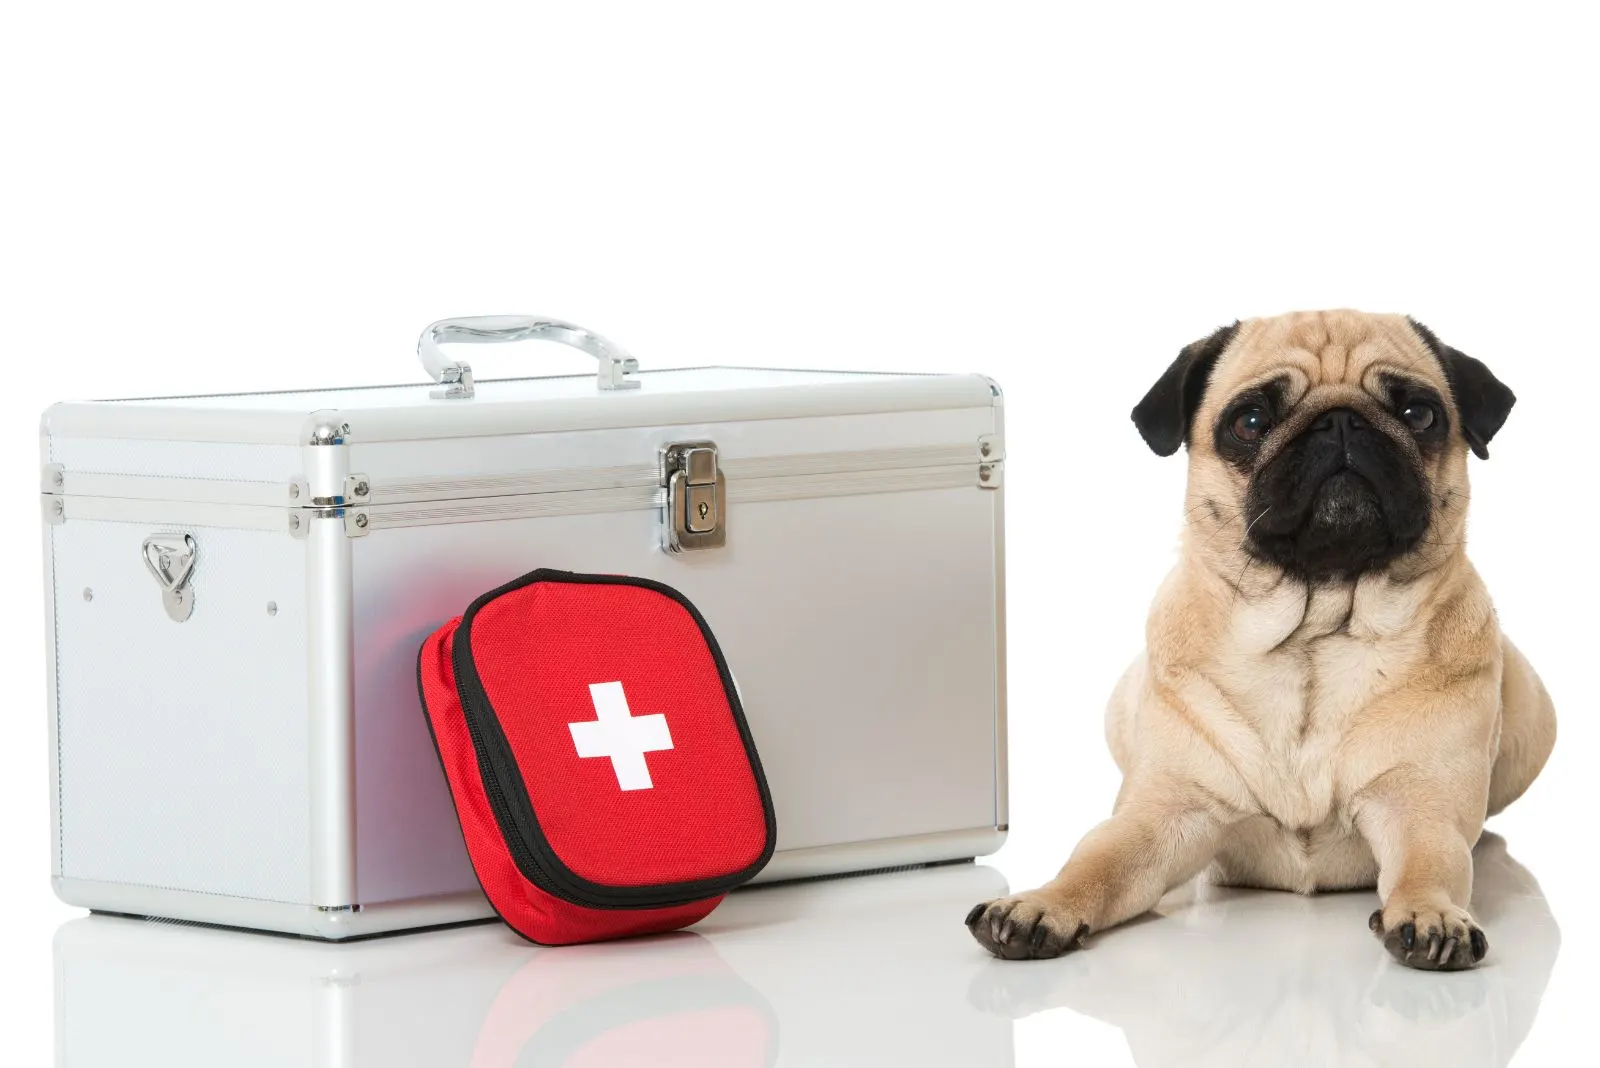 dog with first aid kit